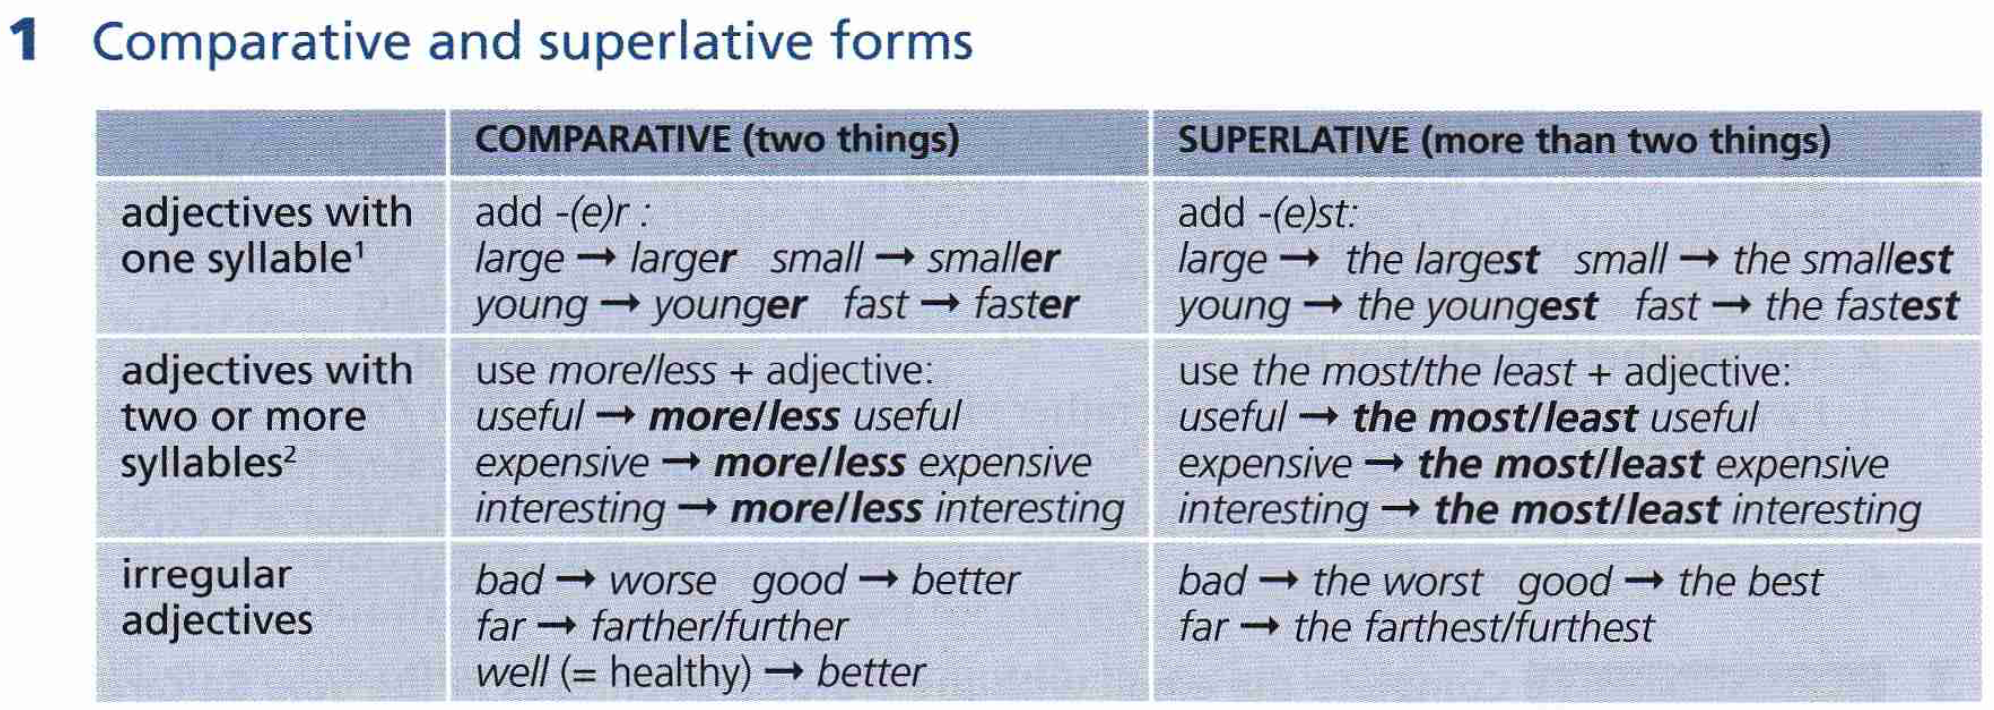 Comparative правило. Comparatives and Superlatives правило. Таблица Comparative and Superlative. Comparative and Superlative adjectives правило. Degrees of Comparison of adjectives таблица.